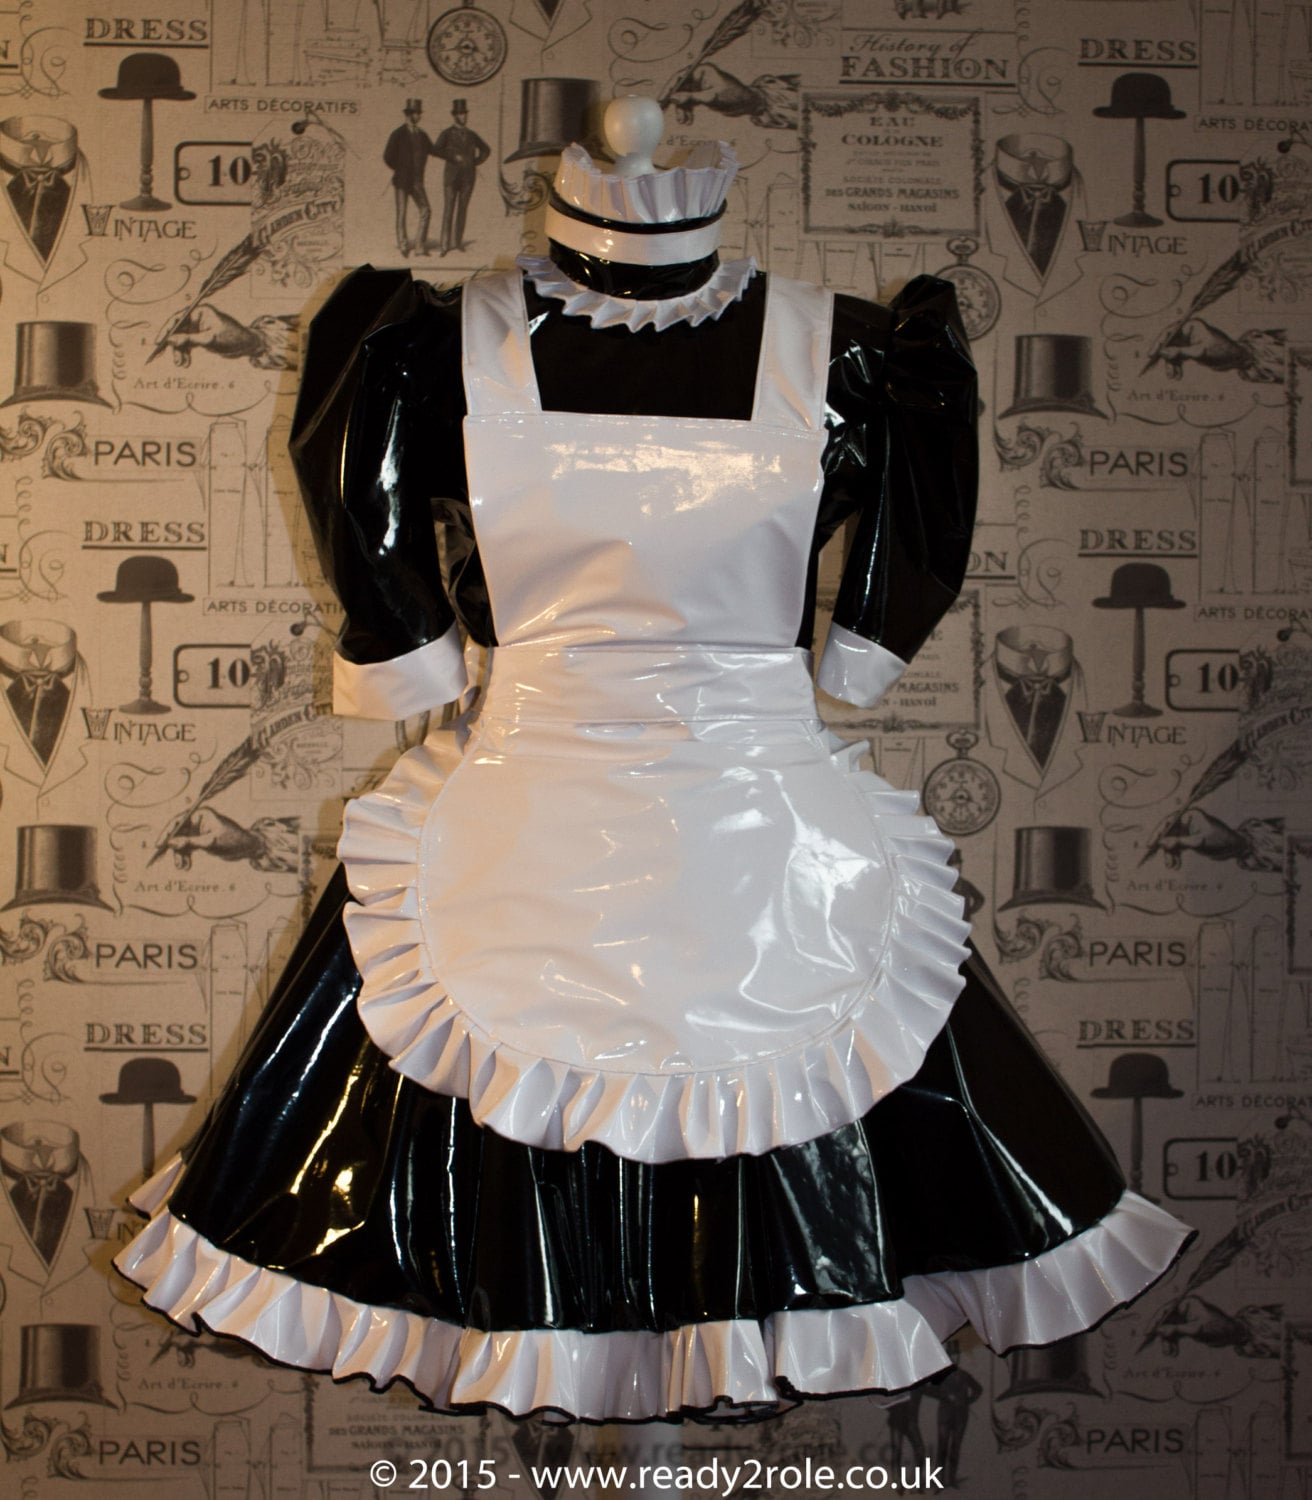 The Hi Alice More Pvc Maid Dress With Full Apron Etsy Canada